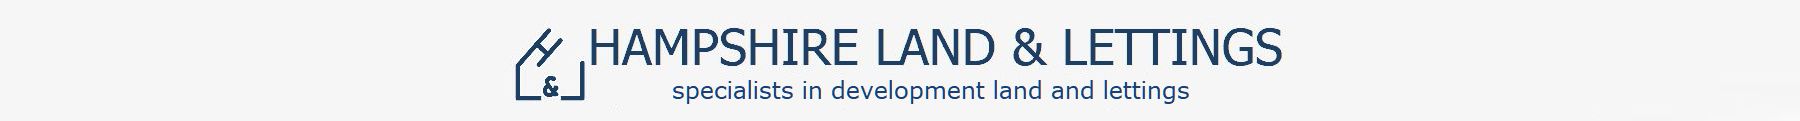 Hampshire Land Development and lettings